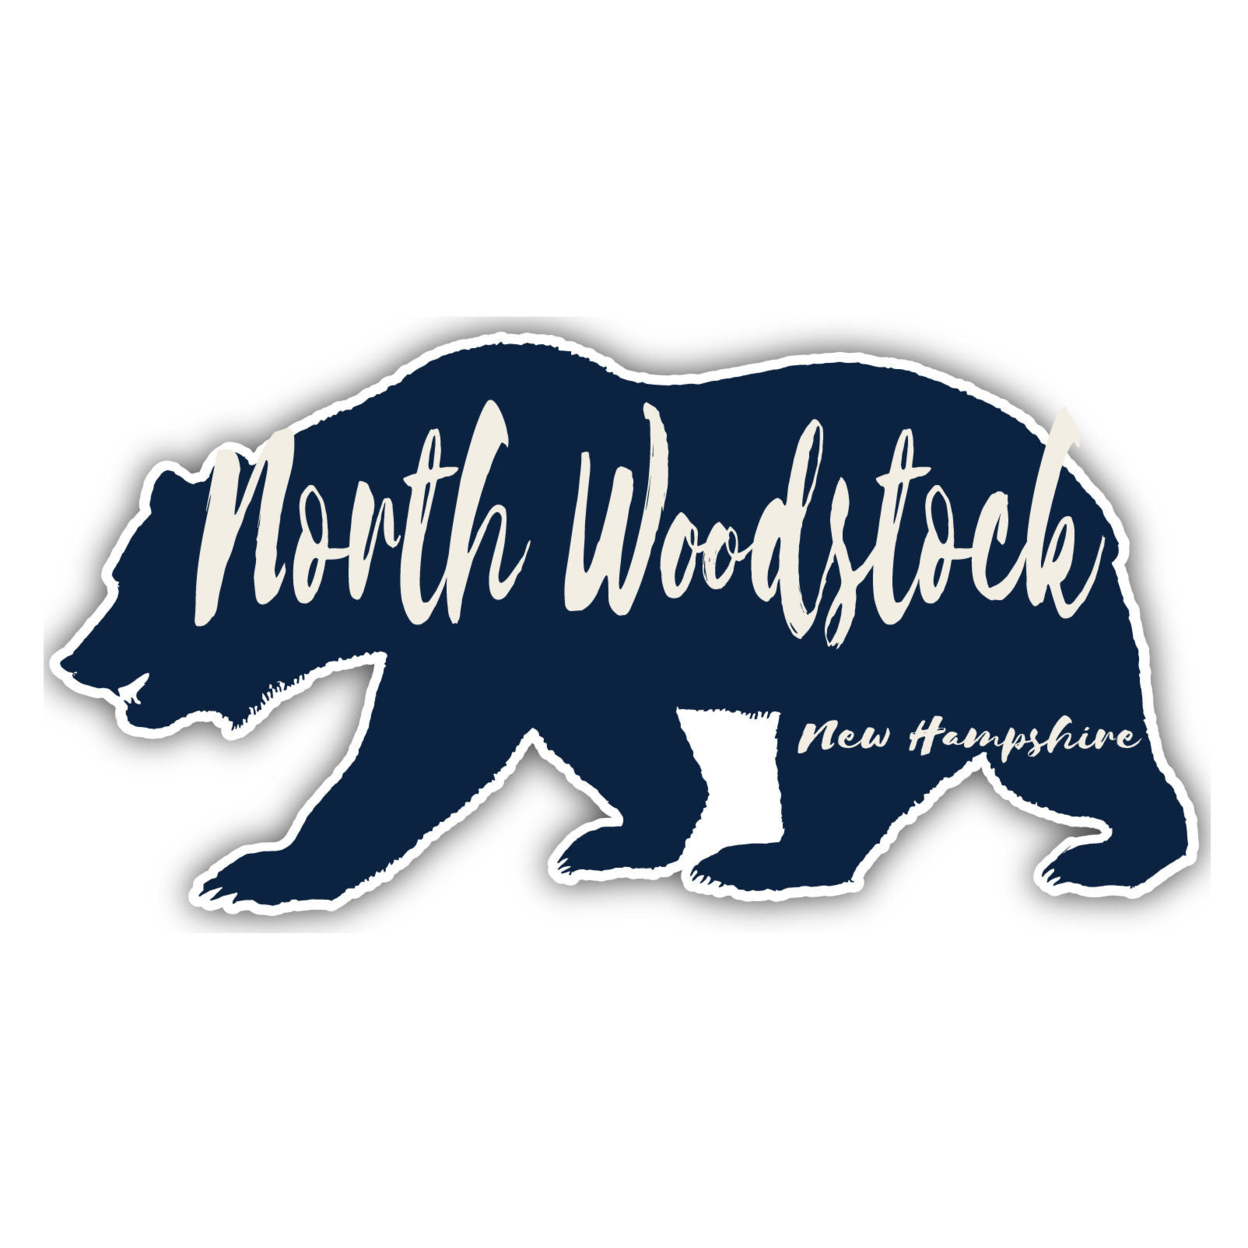 North Woodstock New Hampshire Souvenir Decorative Stickers (Choose Theme And Size) - Single Unit, 2-Inch, Bear